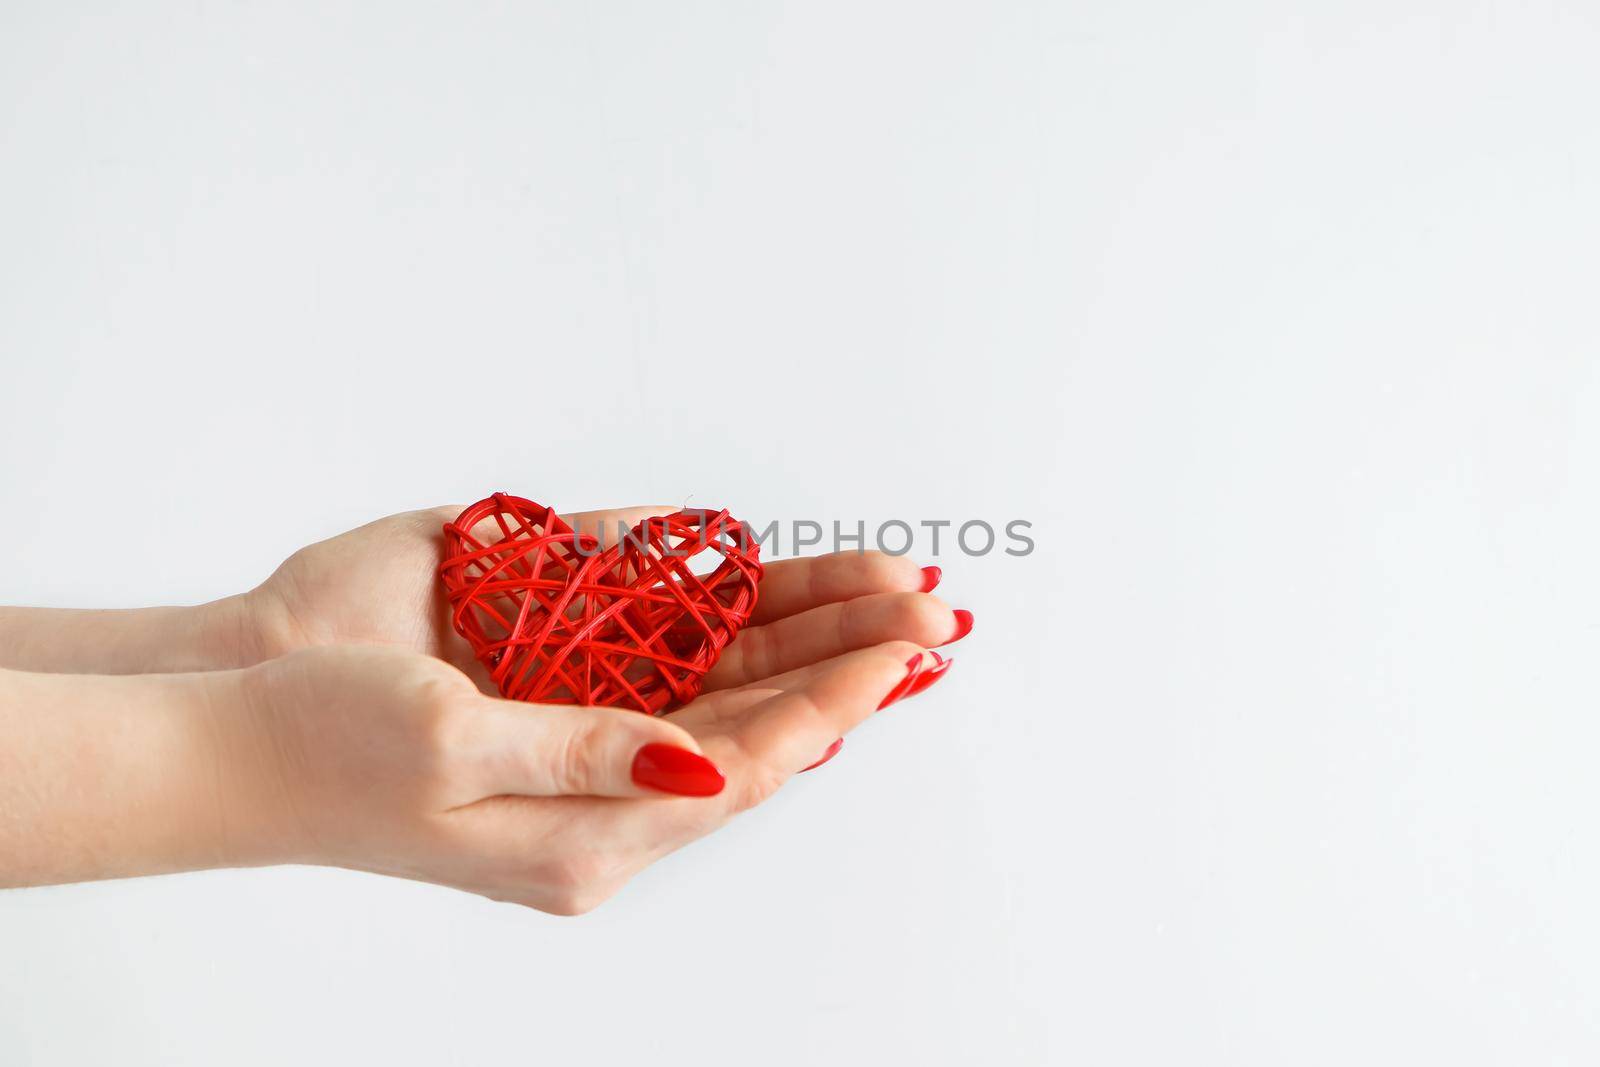 Hands holding a red heart on a white background. The concept of health and love. Hands of a young woman holding a red heart.